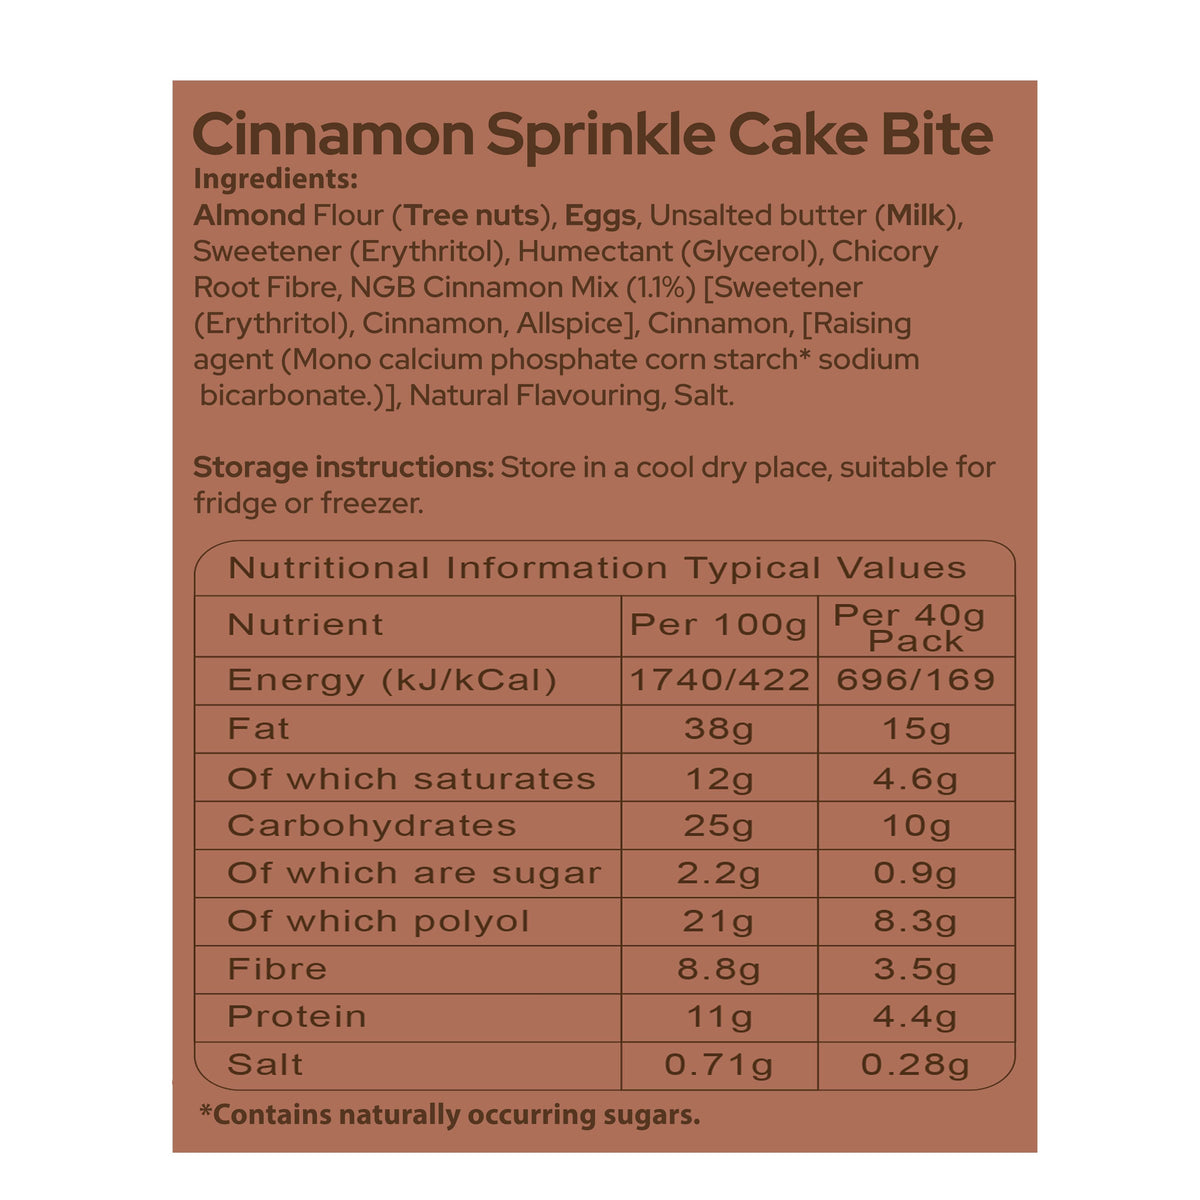 An Image of Cinnamon Sprinkle Cake Bite Nutritional Information And Ingredients